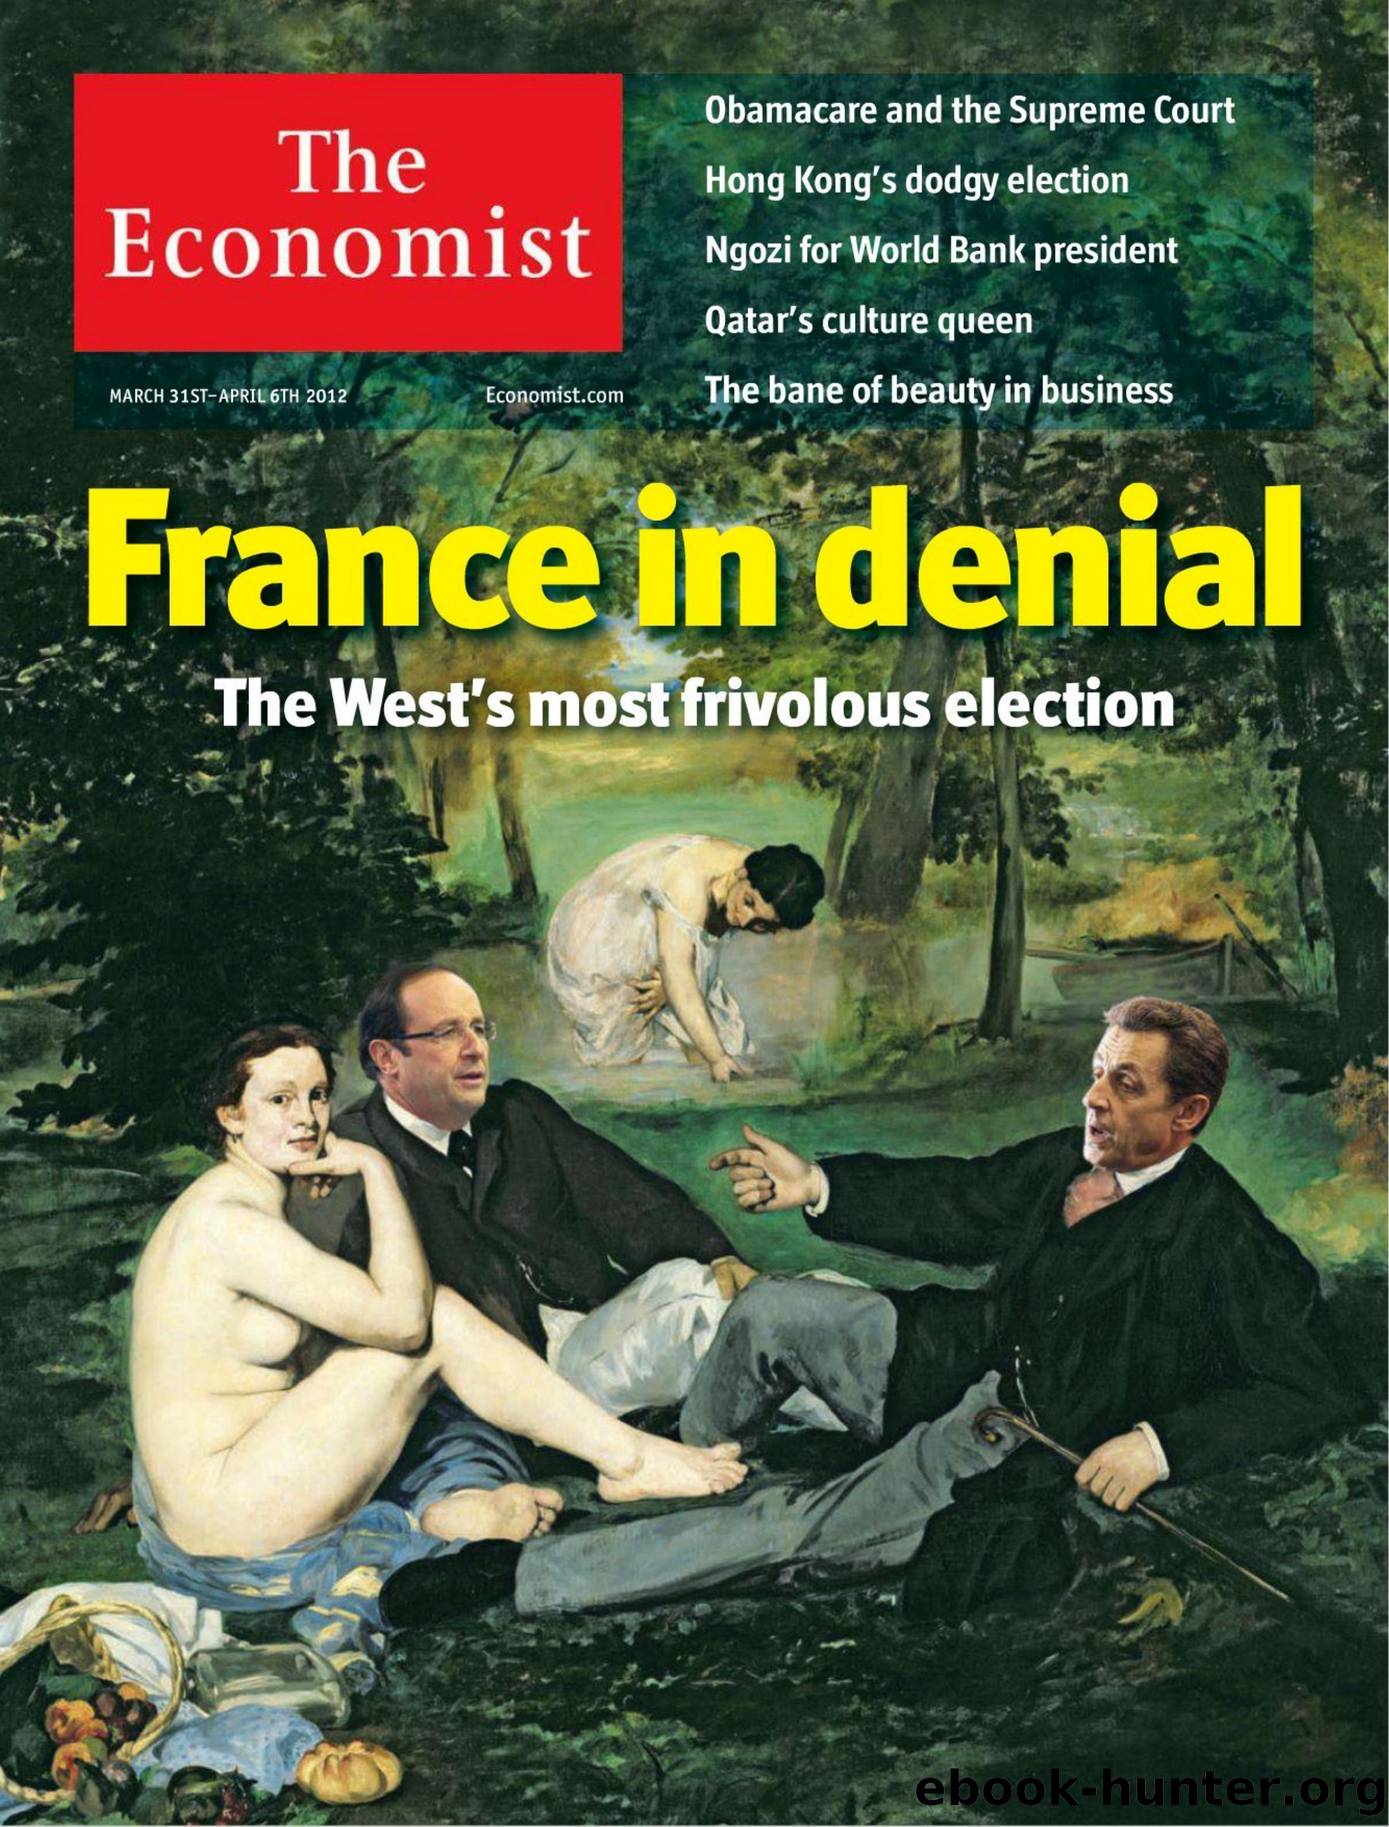 The Economist by N.8778 03-31-2012